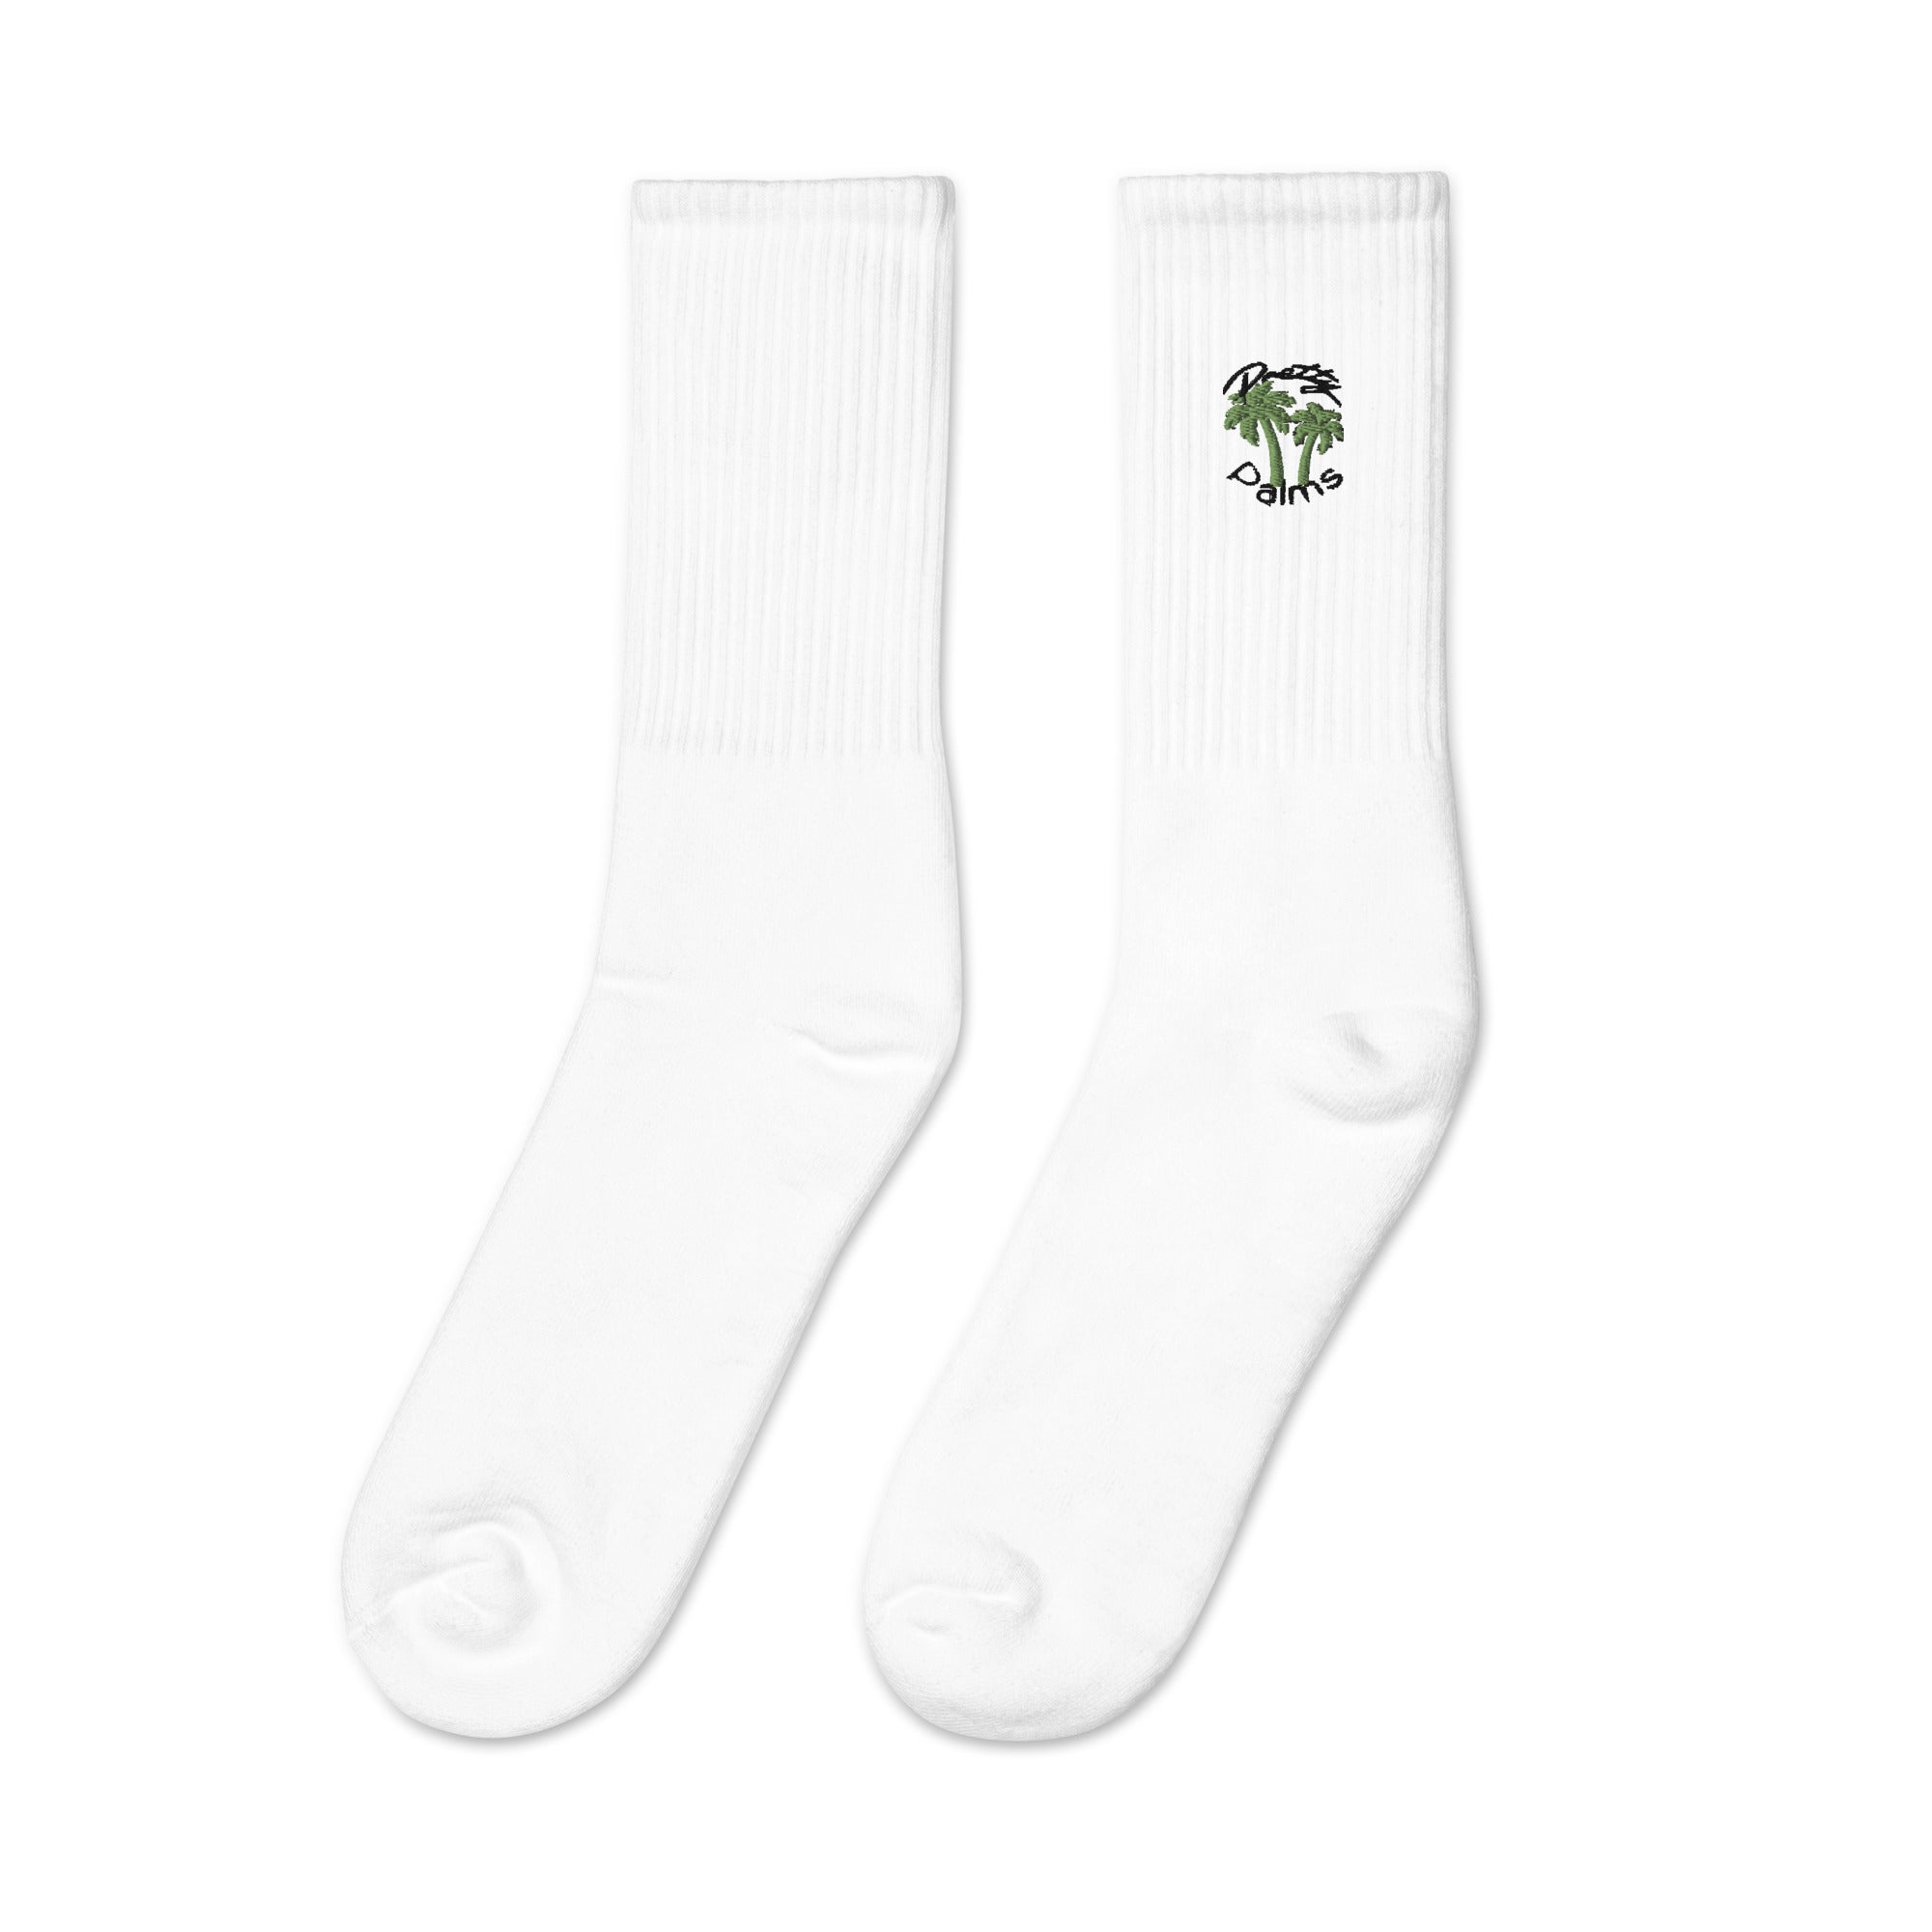 PrettyPalms Embroidered socks